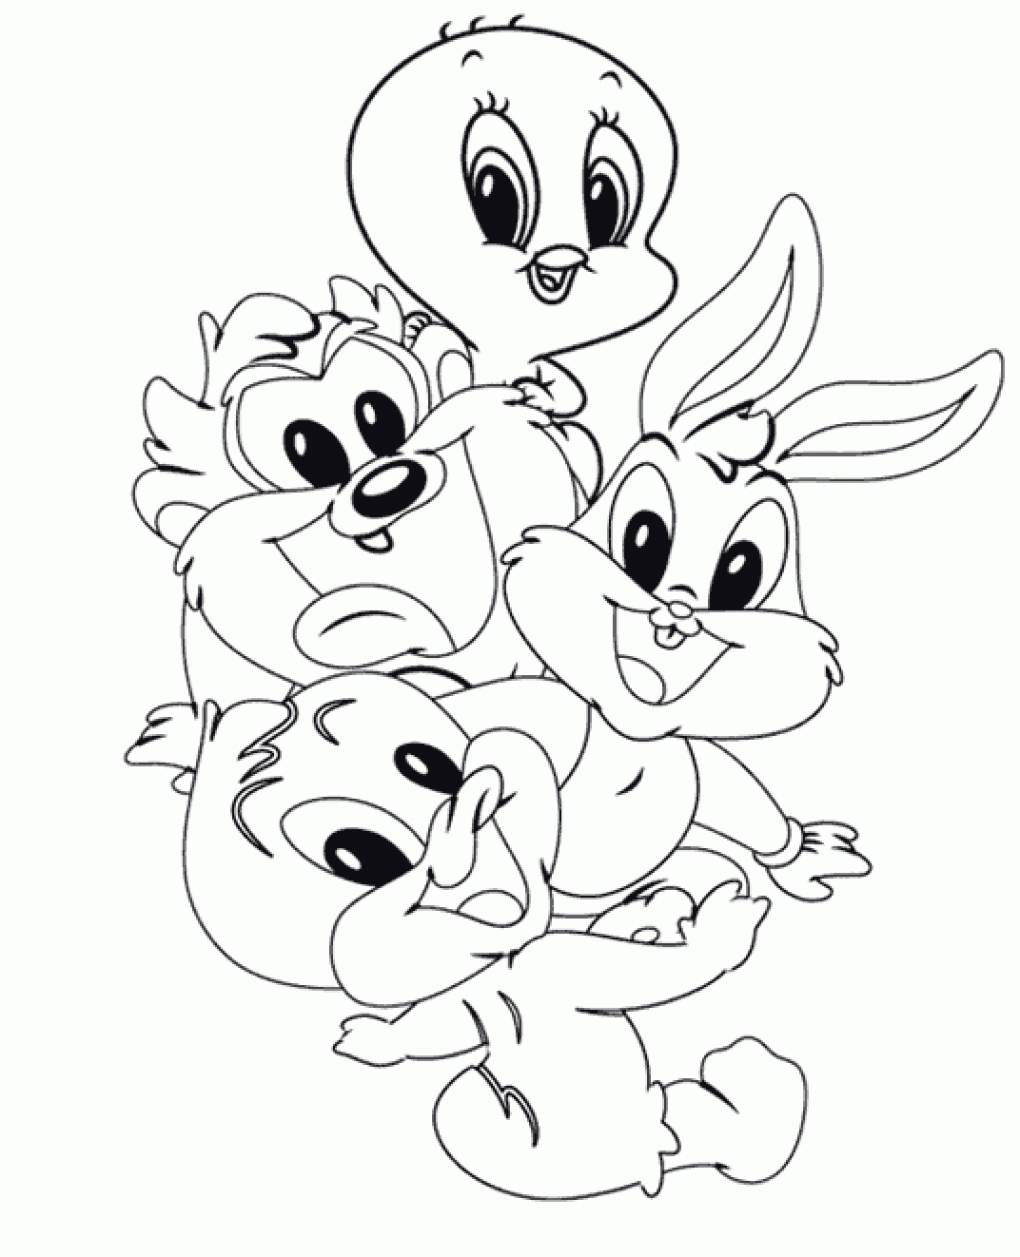 Taz Cartoon Coloring Pages Images Of Looney Tunes Characters Coloring Pages Sabadaphnecottage